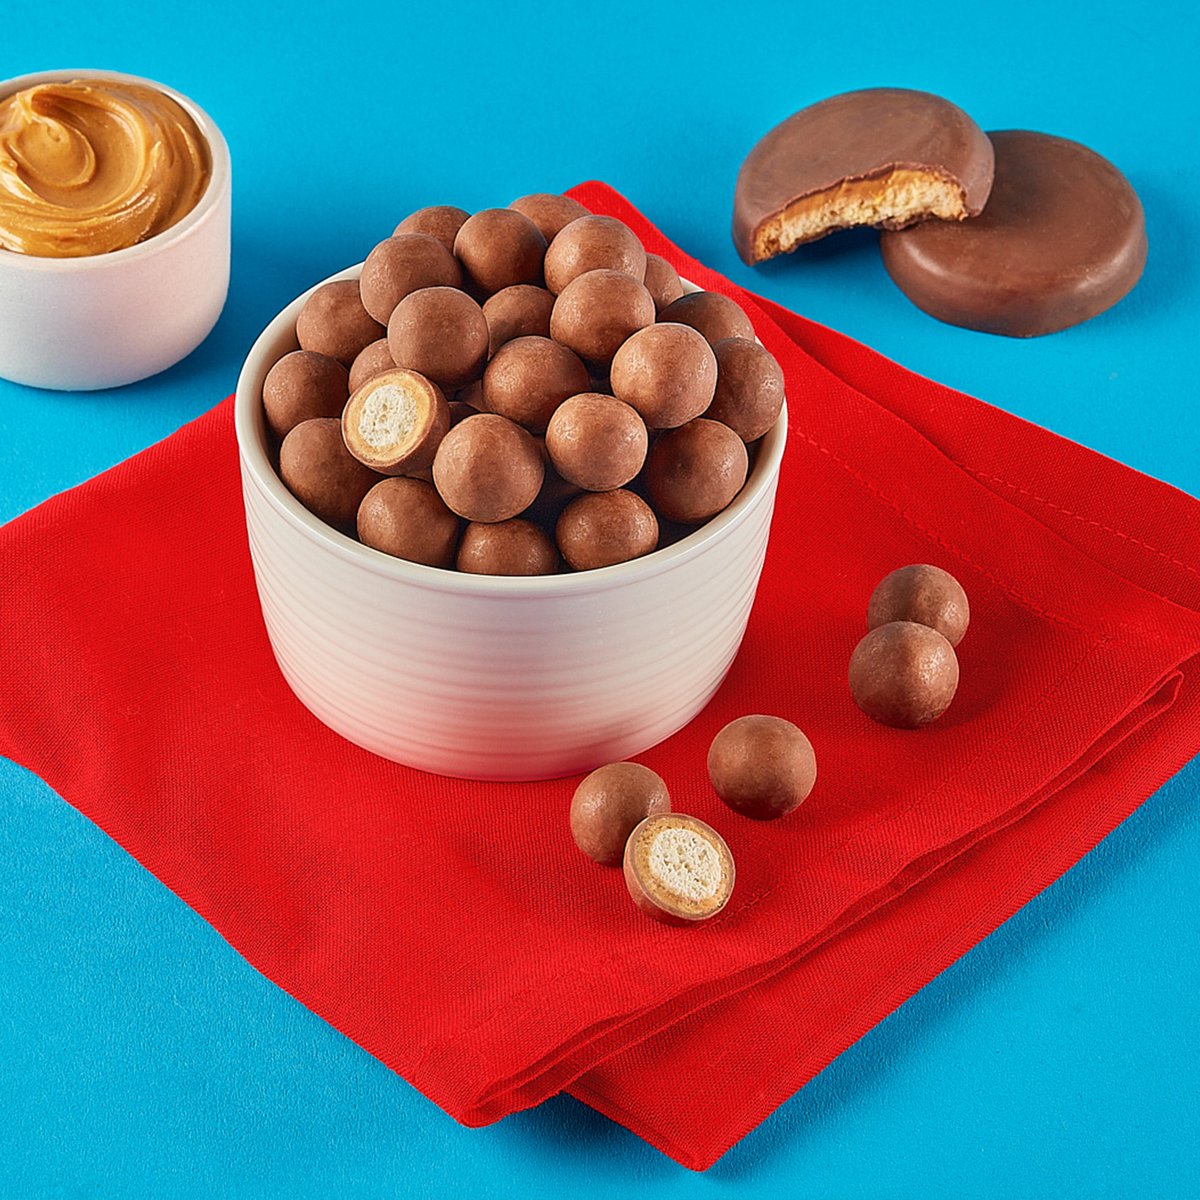 Inspired by the Girl Scout Chocolate Peanut Butter cookie, this bite is a delectable treat boasting a vanilla cookie center, wrapped in a heavenly SKIPPY® peanut butter coating, and rolled in a luscious milk chocolatey coating.